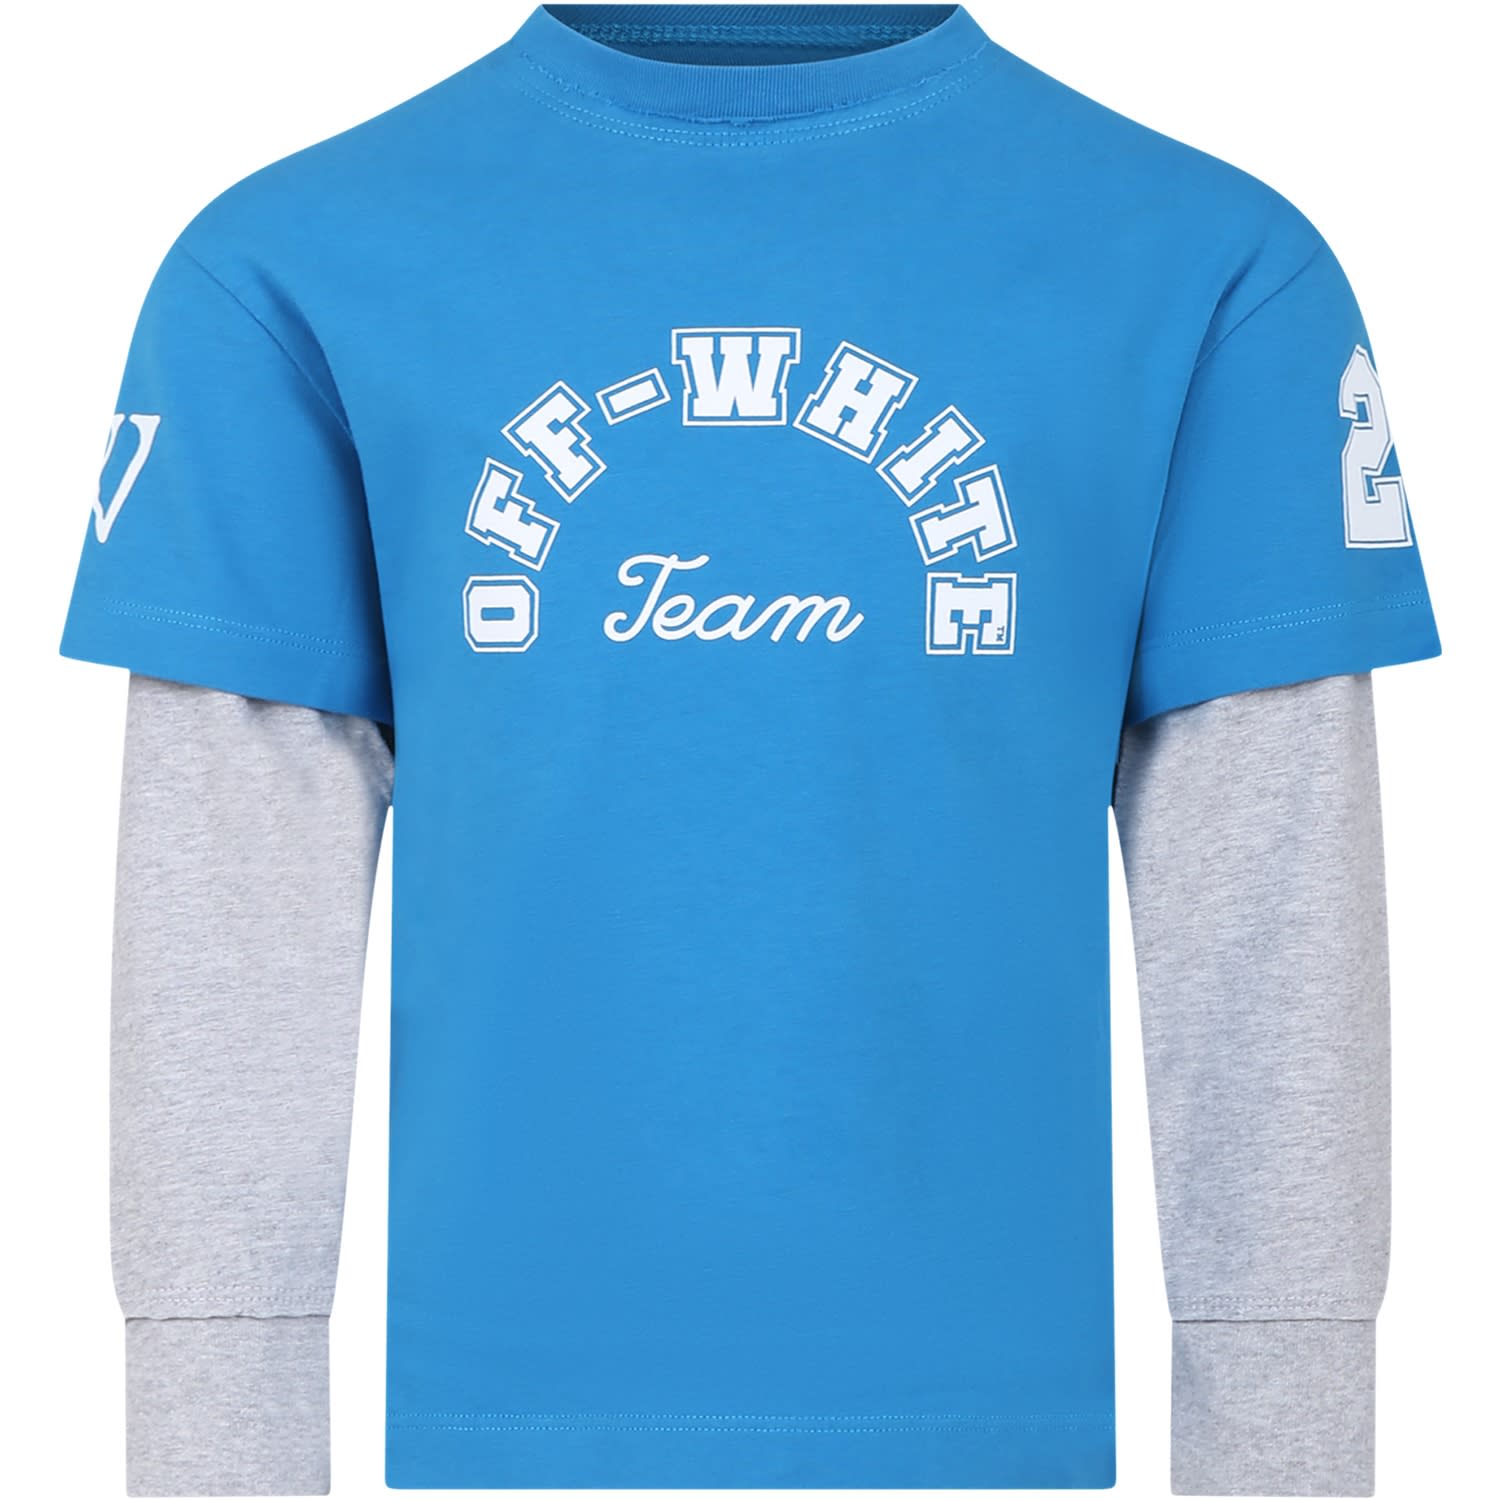 Off-white Kids' Light Blue T-shirt For Boy With Logo And Number